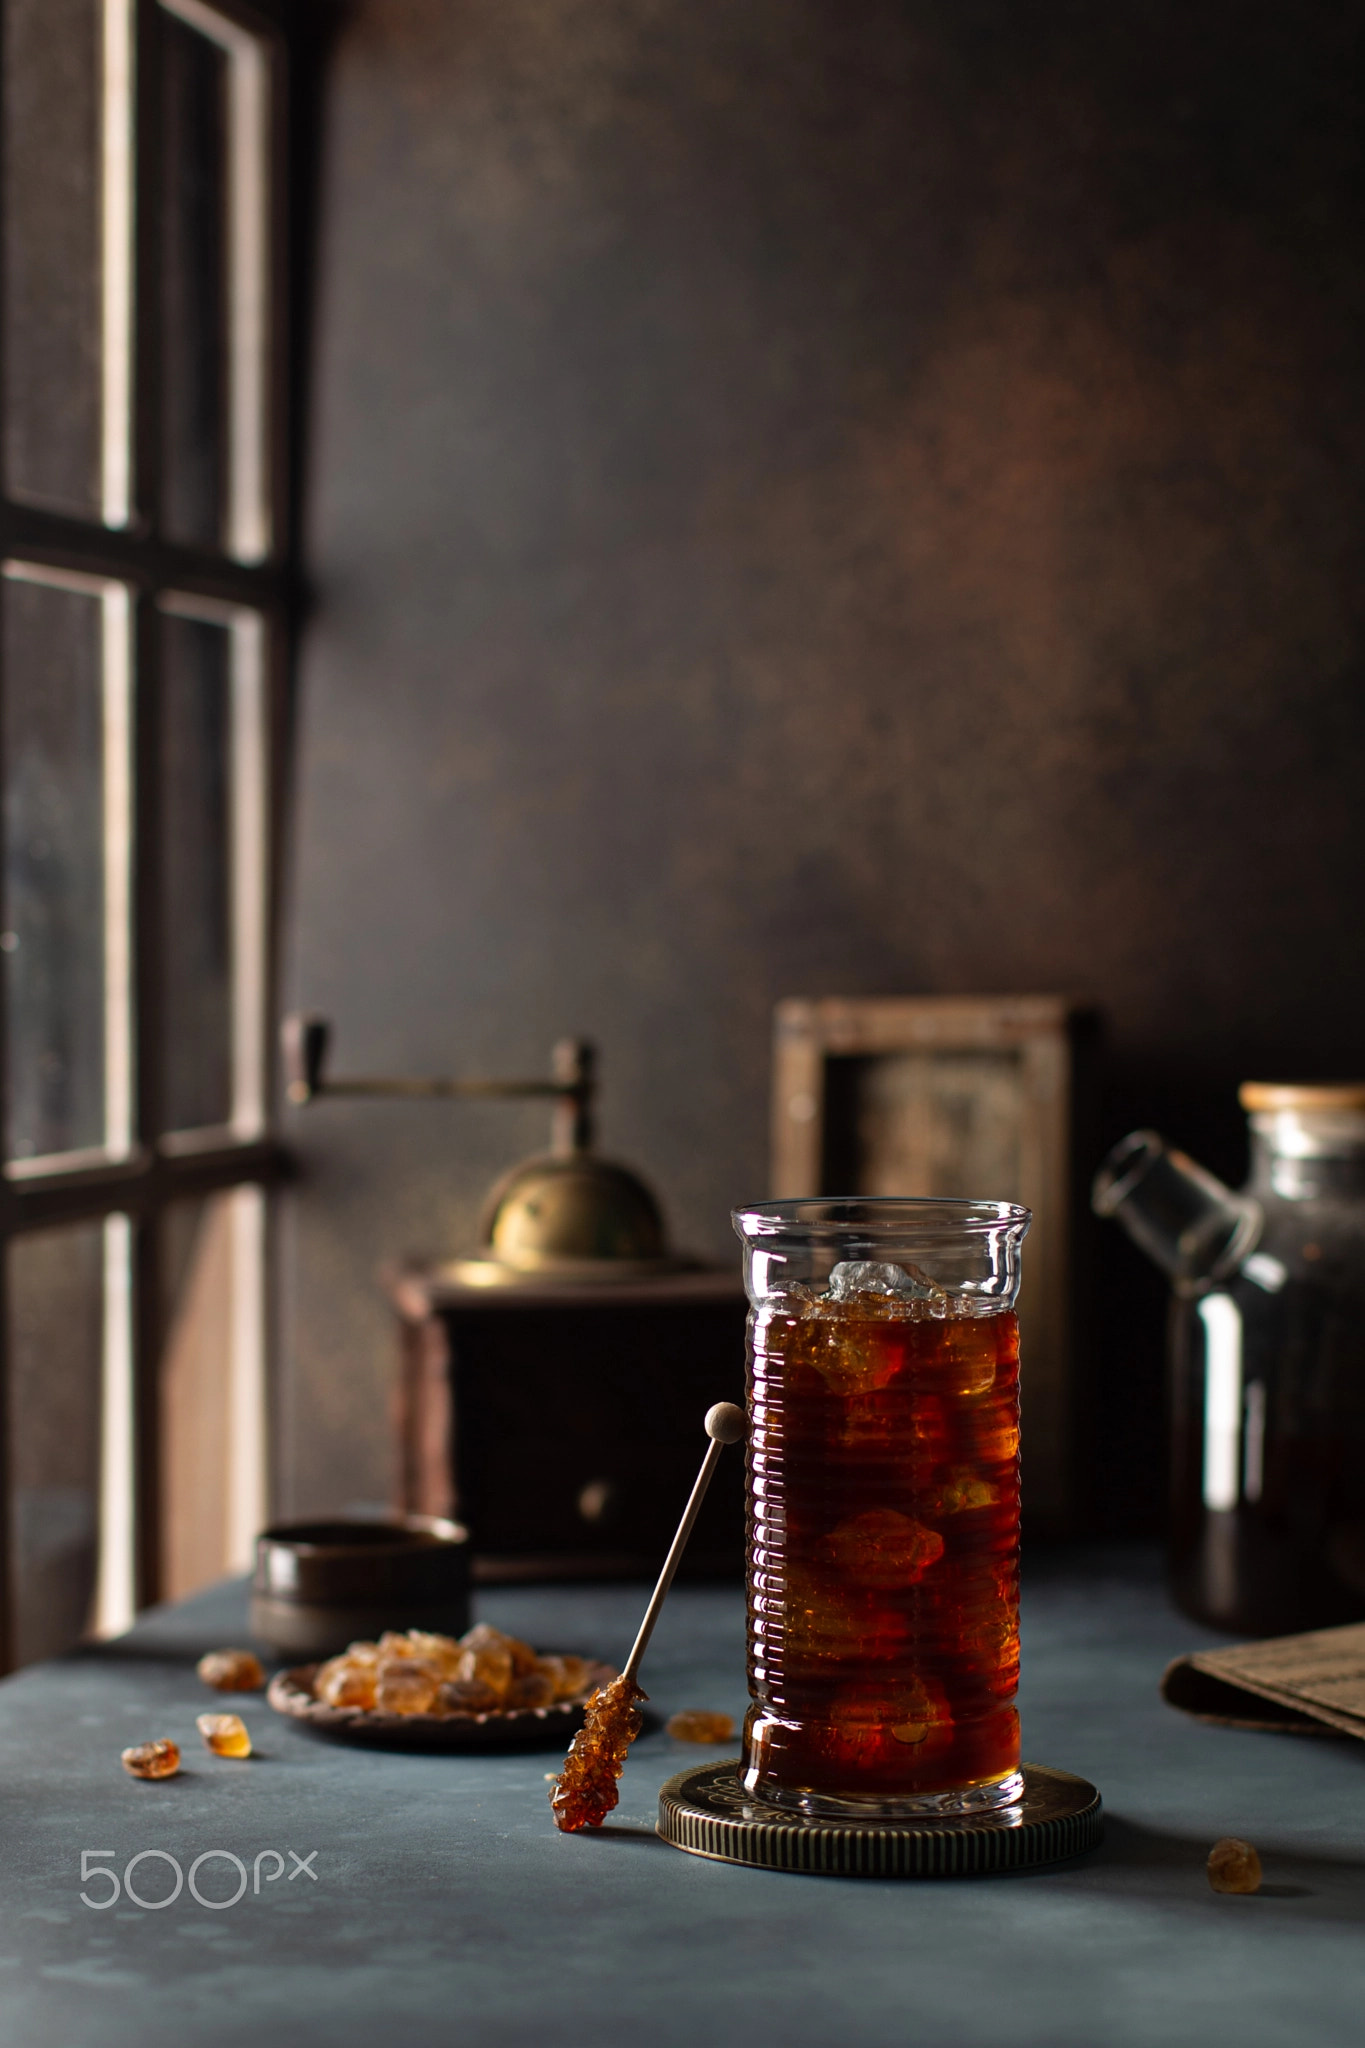 Glass of iced coffee on the table near the wooden window with vintage